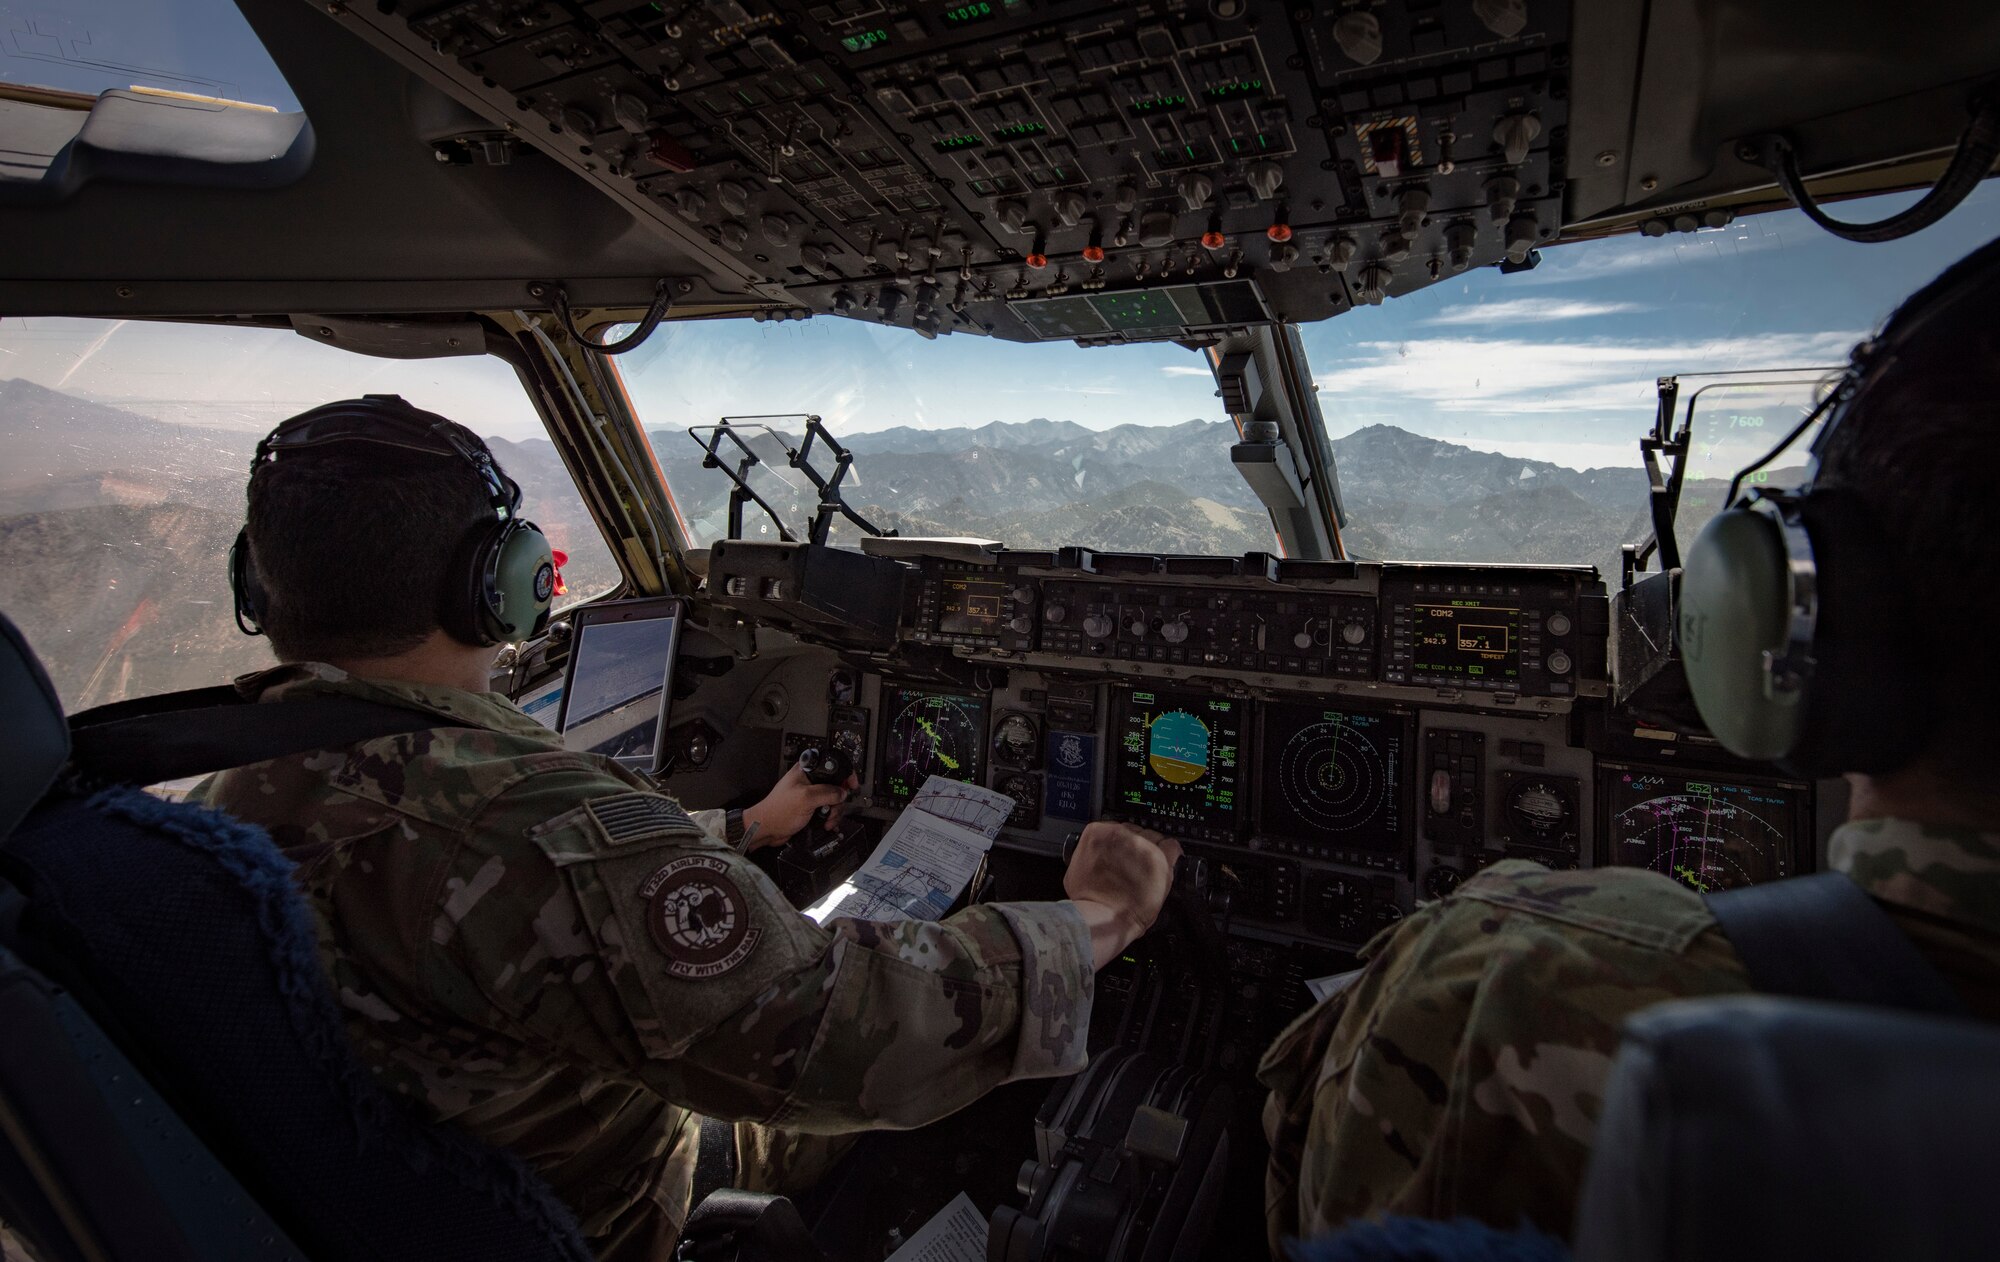 Maj. David Rodriguez, 732nd Airlift Squadron Instructor Pilot, and Capt. Ali Chinisaz, 6th Airlift Squadron instructor pilot, prepare to perform low-altitude, evasive maneuvers in a C-17 Globemaster III cargo aircraft over the Nevada Test and Training Range, June 9, 2018. The C-17 is capable of performing rapid strategic delivery of troops and all types of cargo. (U.S. Air Force photo by Airman 1st Class Andrew D. Sarver)